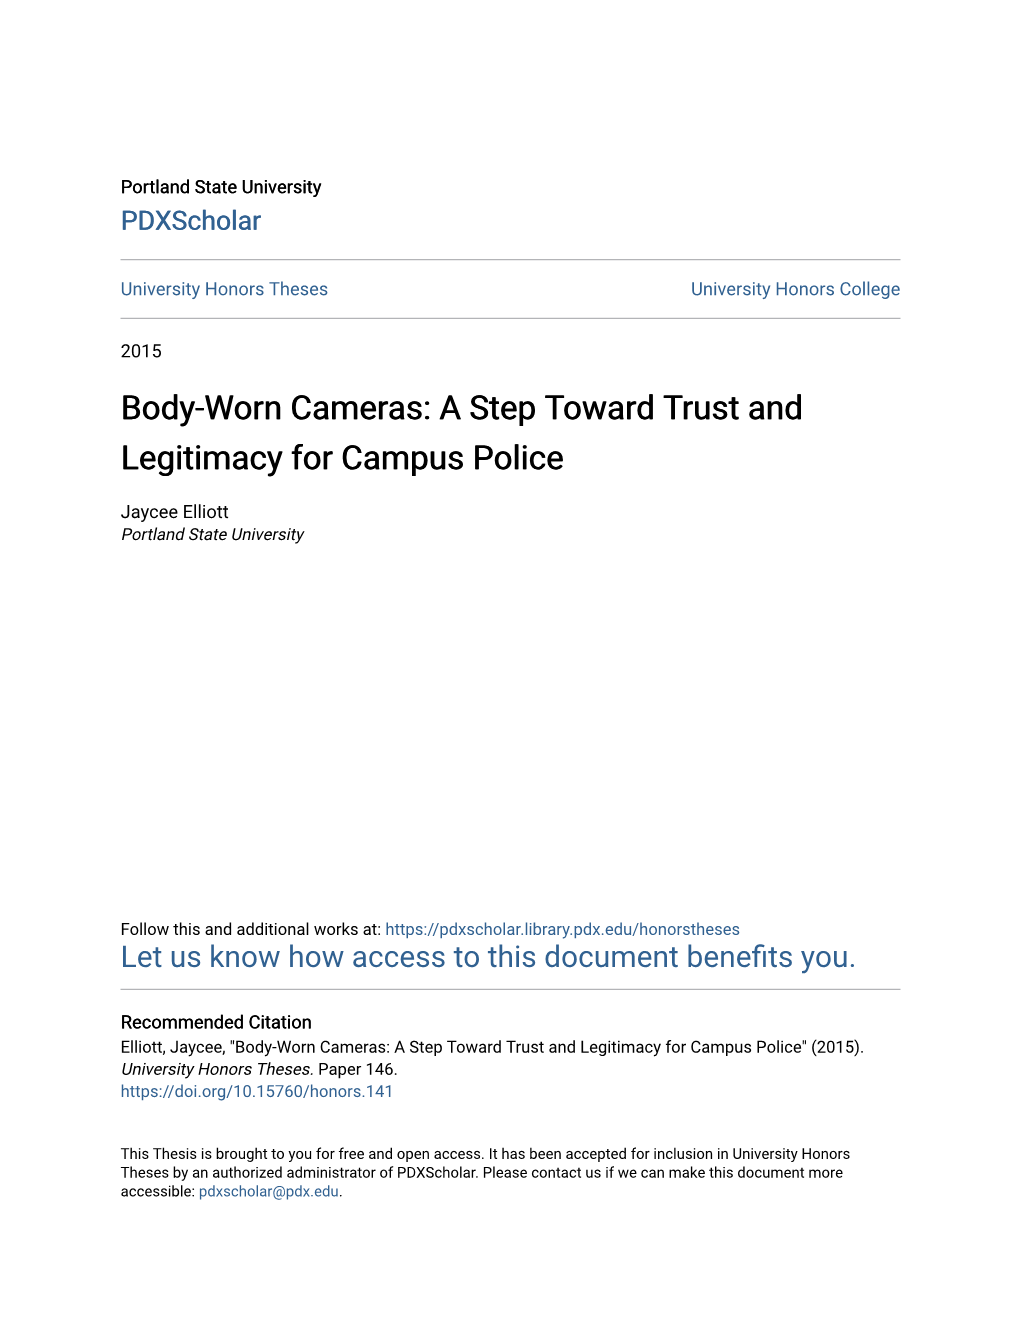 Body-Worn Cameras: a Step Toward Trust and Legitimacy for Campus Police